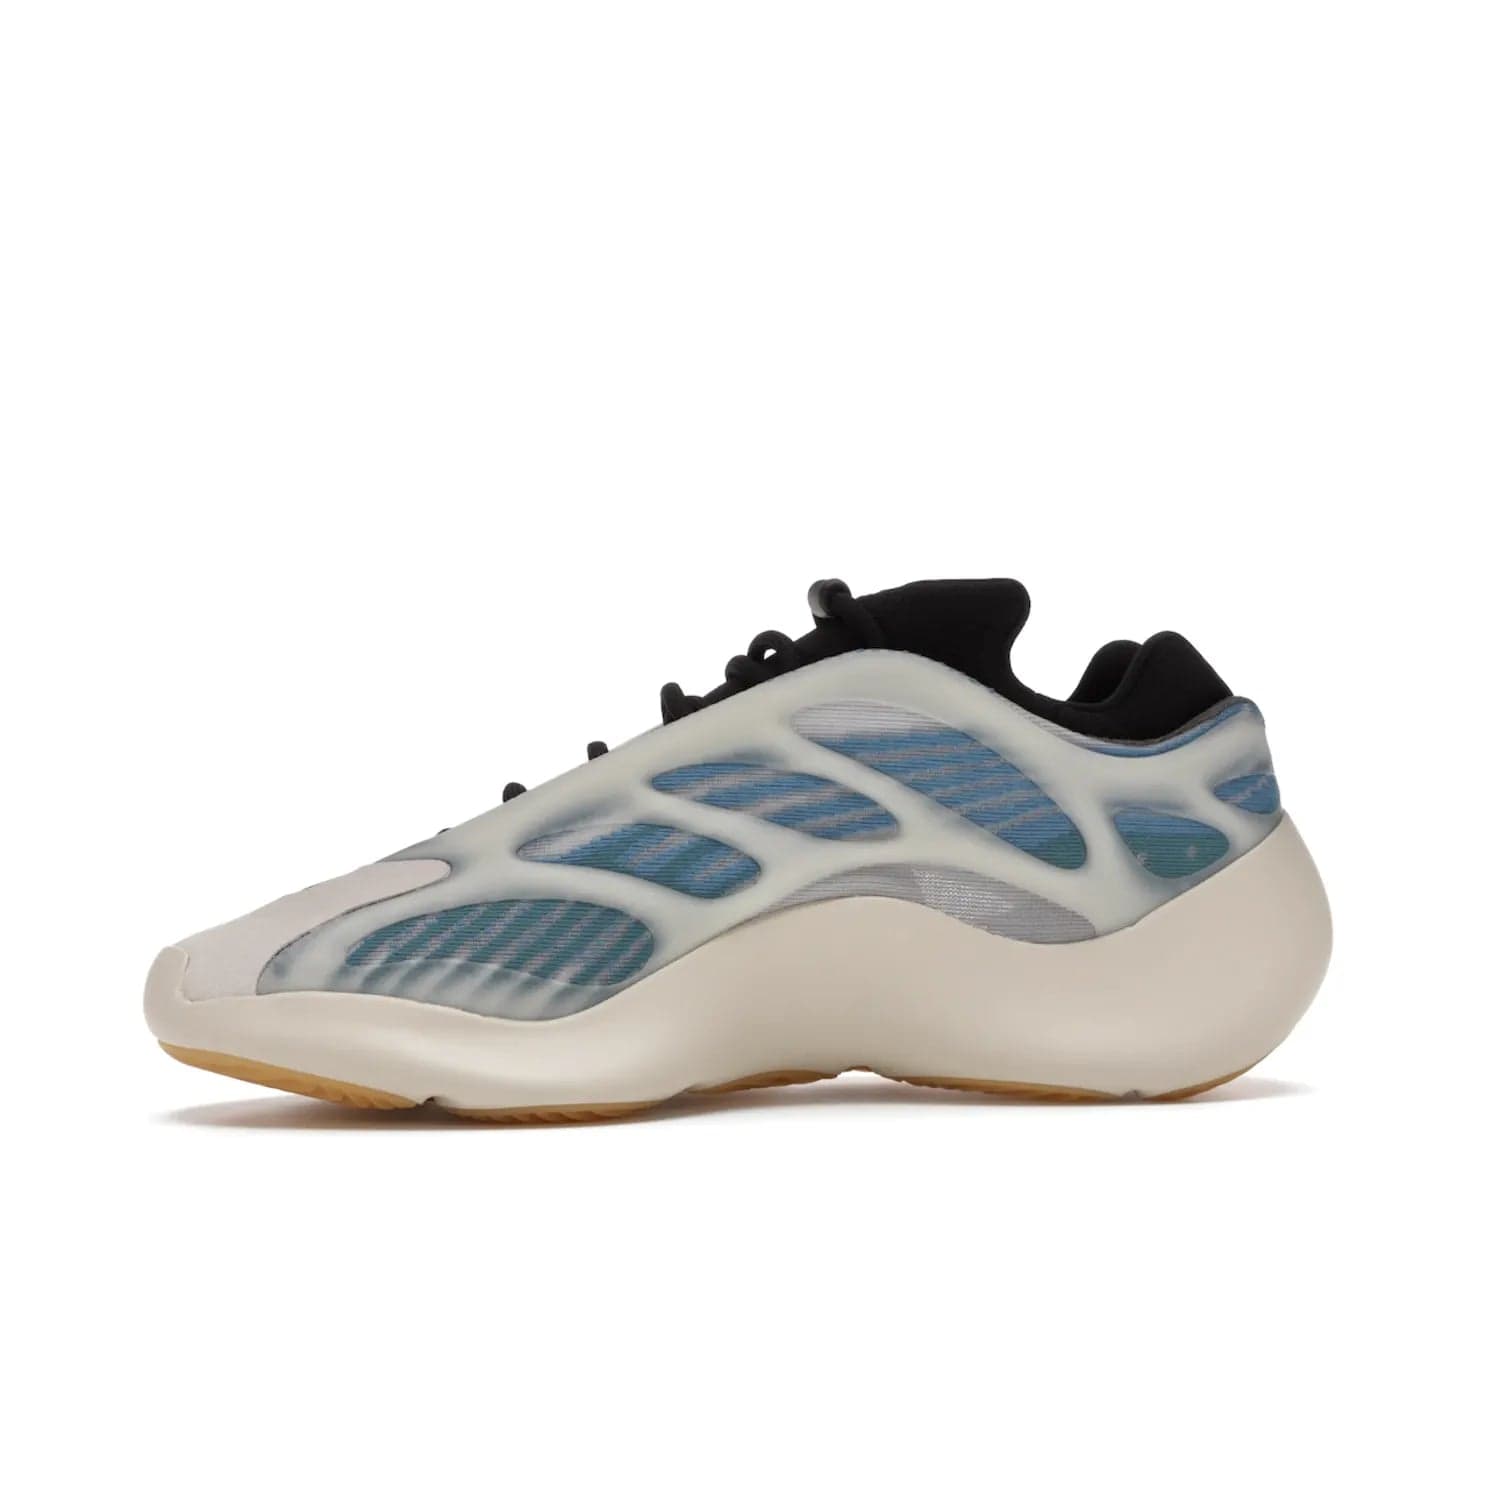 adidas Yeezy 700 V3 Kyanite - Image 18 - Only at www.BallersClubKickz.com - The adidas Yeezy 700 V3 Kyanite offers a layered design featuring a glow-in-the-dark TPU cage and a tonal cream-colored EVA foam midsole. With its herringbone-patterned outsole, the style and comfort of the sneaker will accompany you anywhere. Released in March 2021, it's a great addition to any sneaker wardrobe.